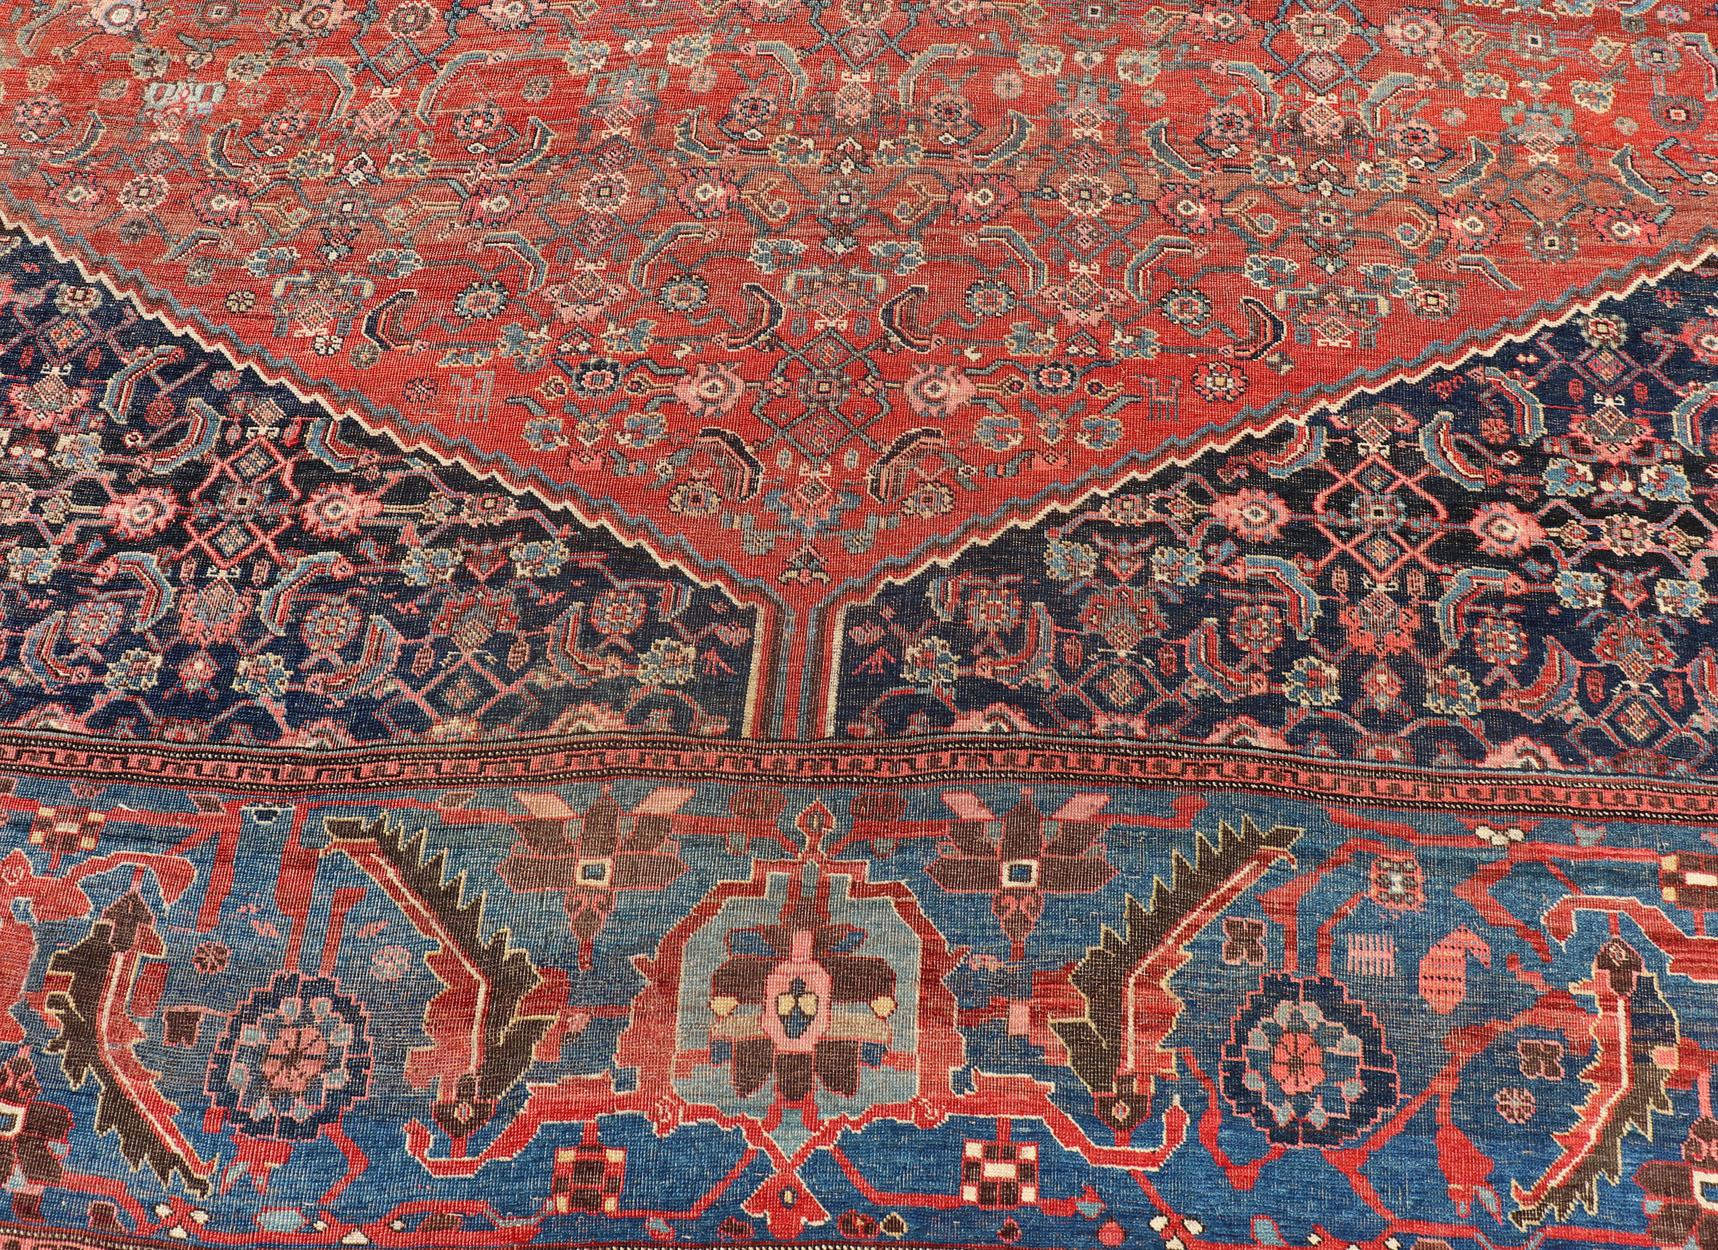 Very Large Antique Persian Bidjar Rug in Multi Shades of Blue, Tera-Cotta & Red For Sale 3